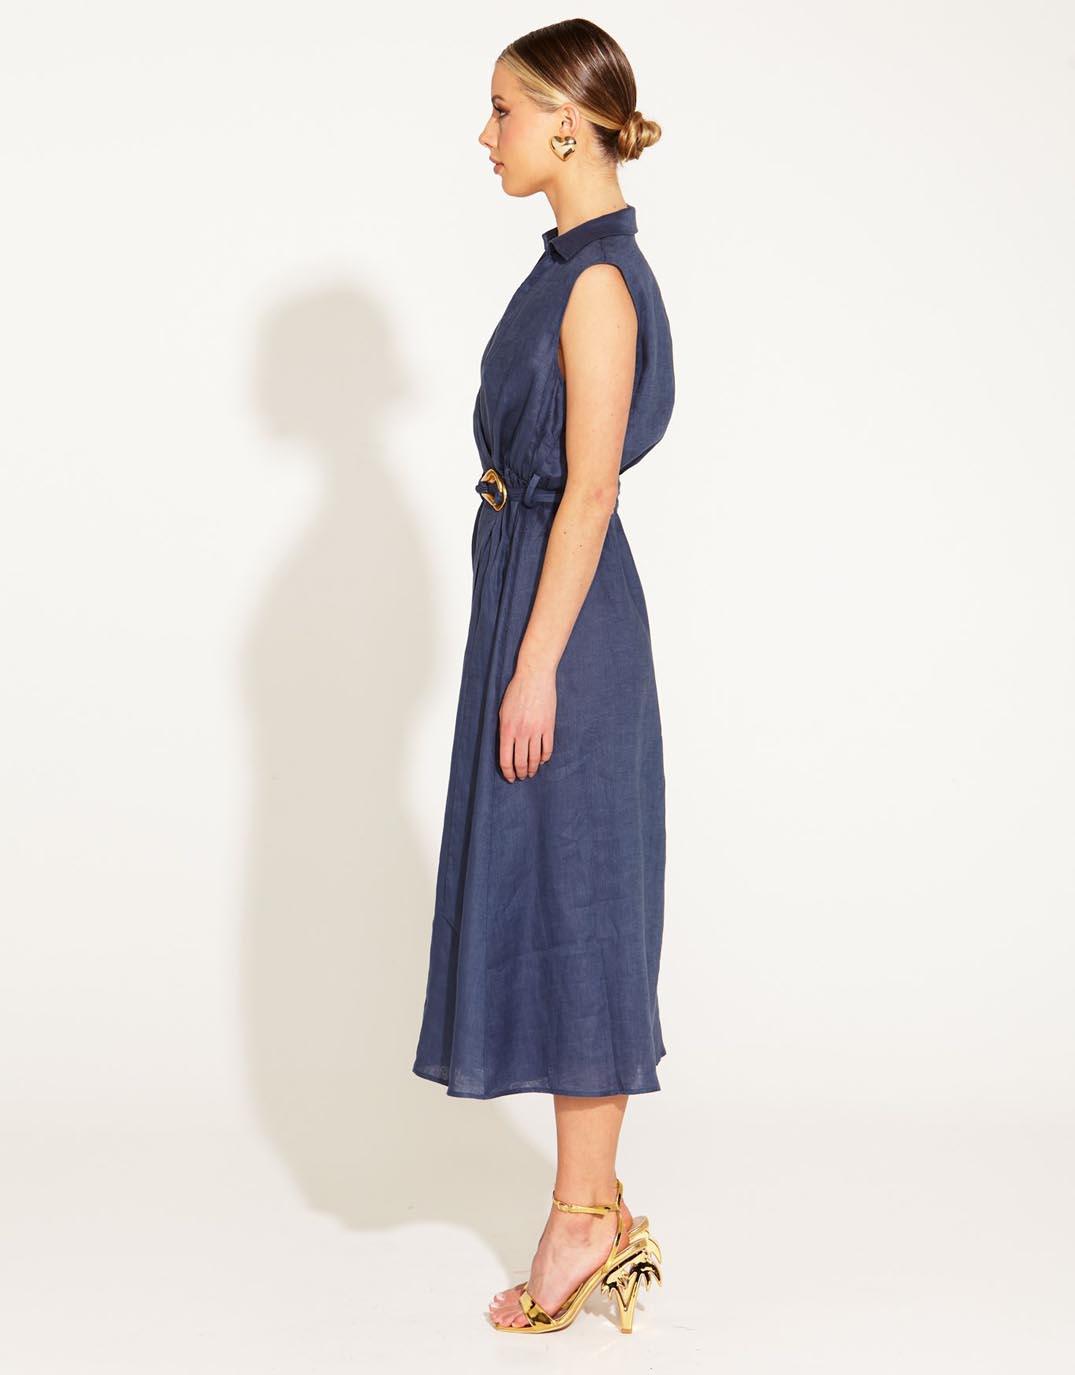 Fate and Becker - A Walk In The Park Sleeveless Dress - Navy - White & Co Living Dresses